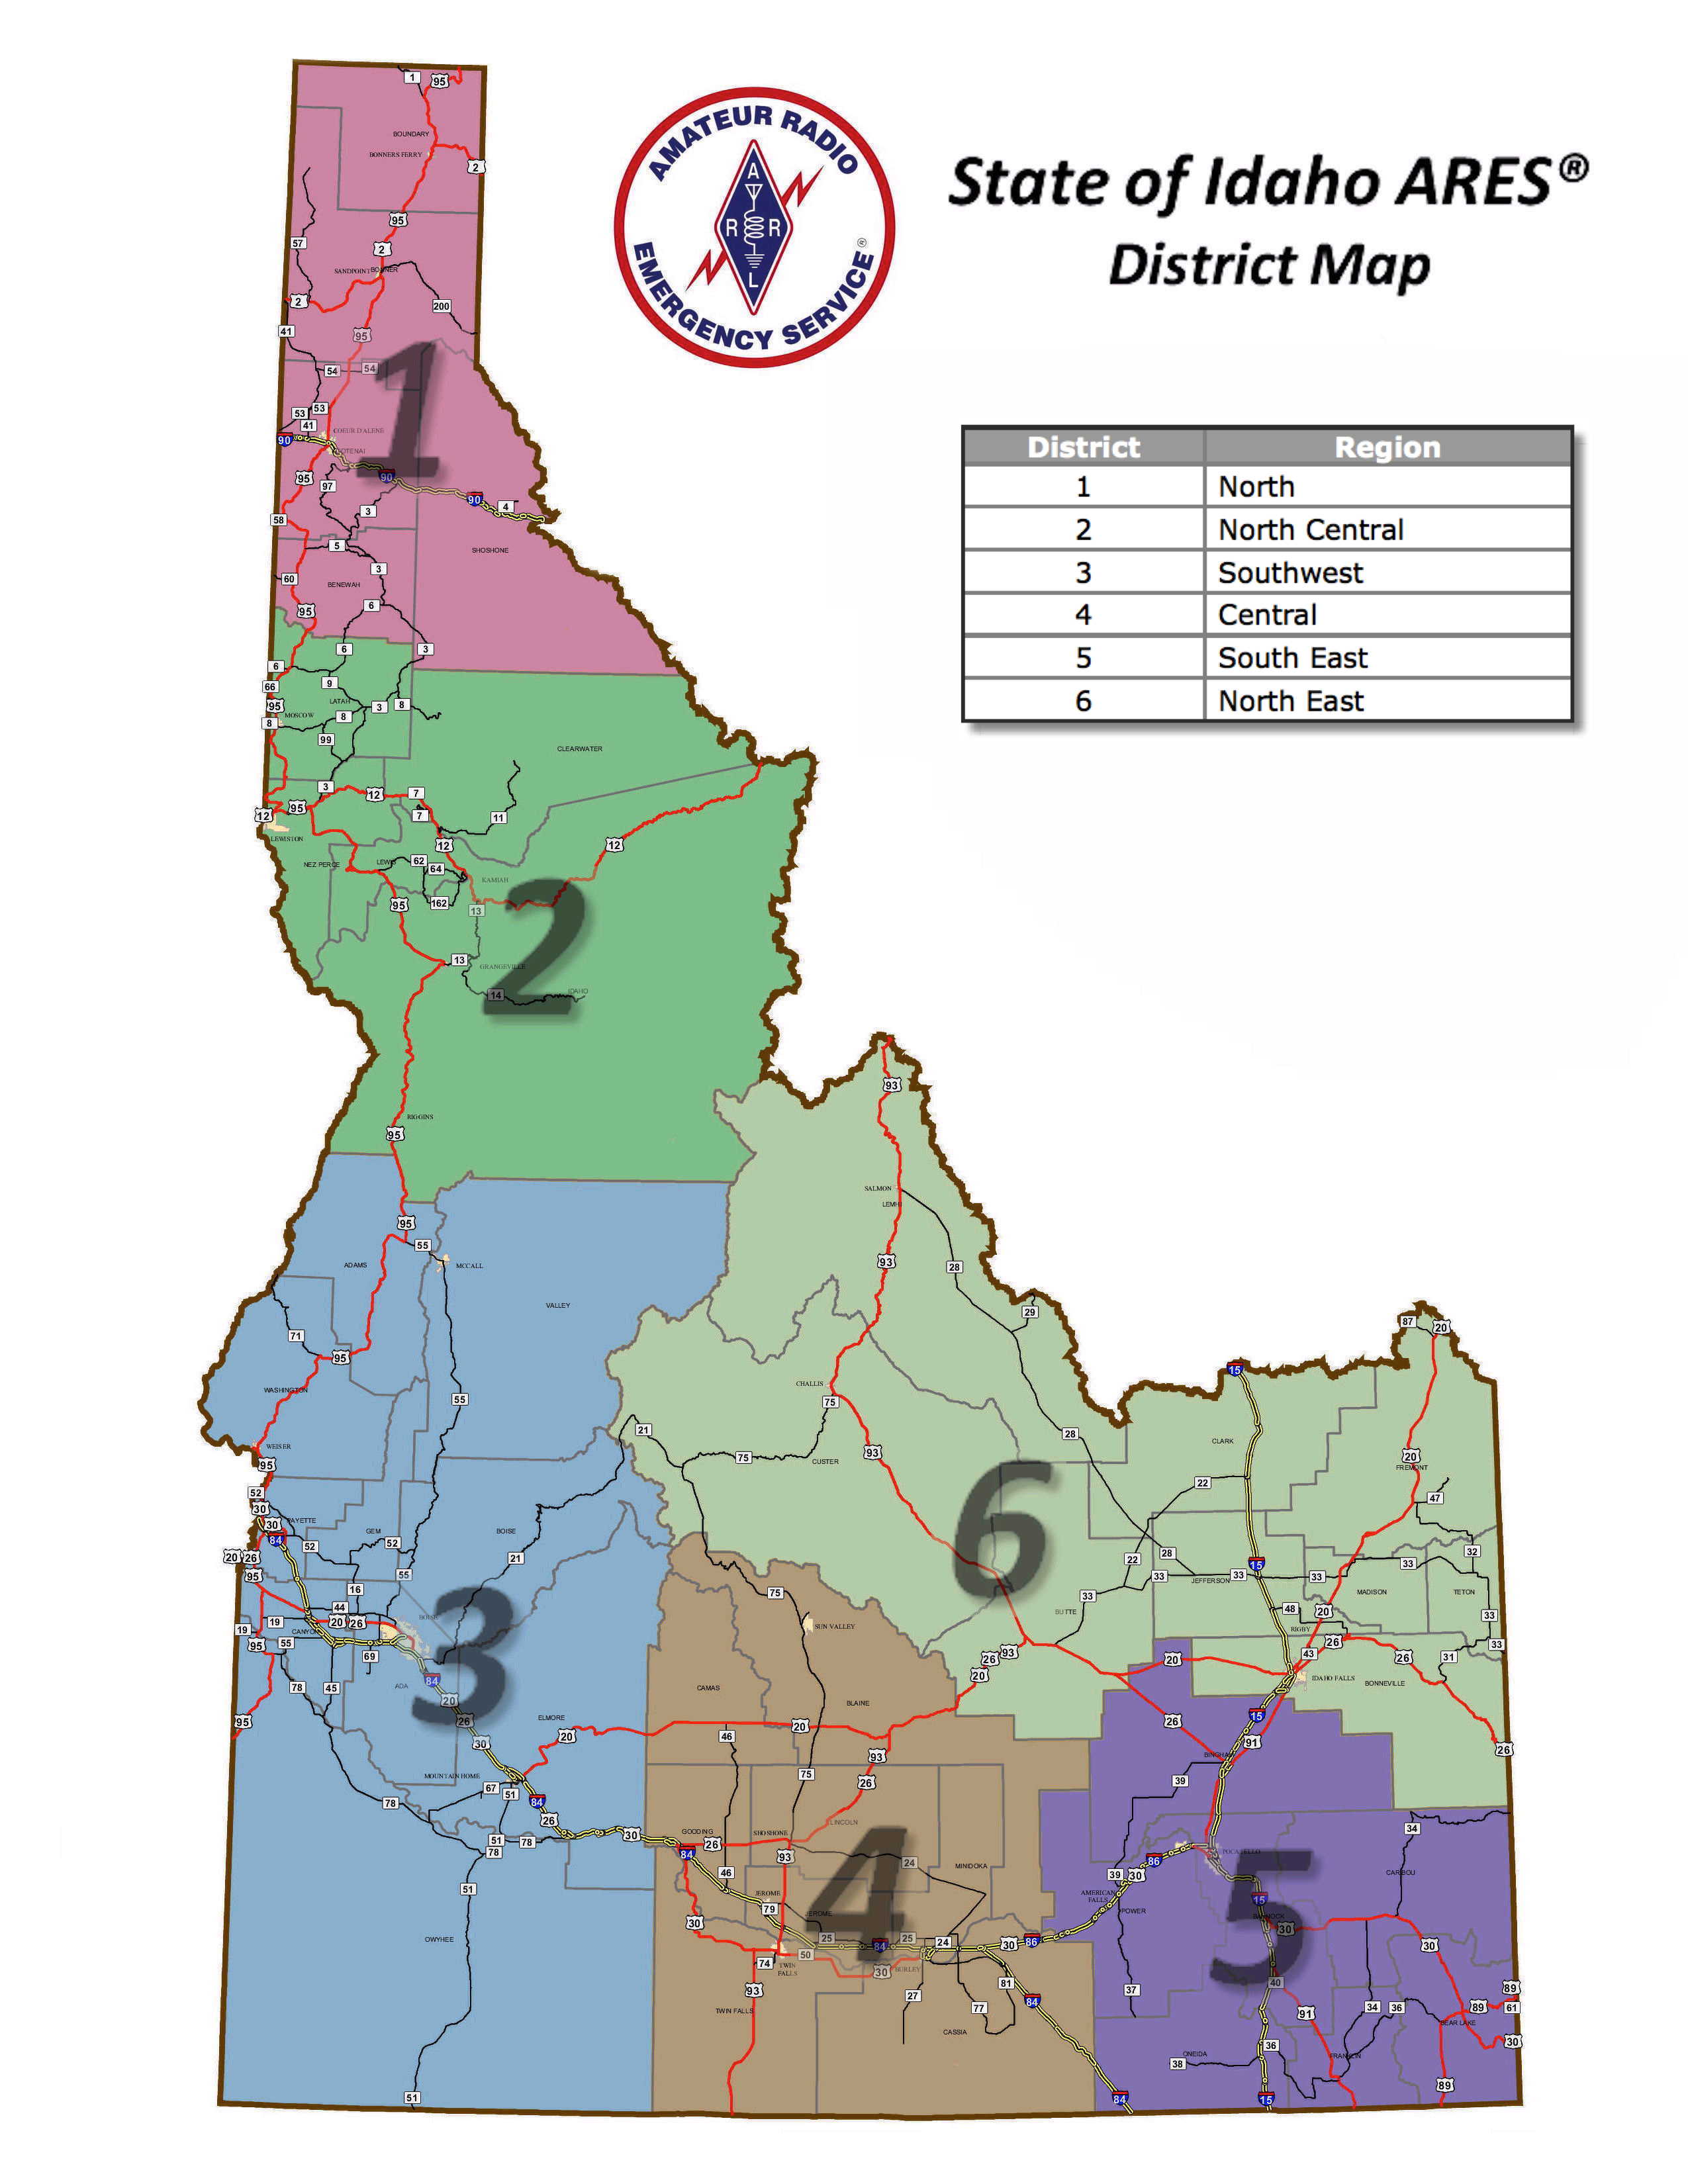 [IDAHO ARES DISTRICTS MAP]